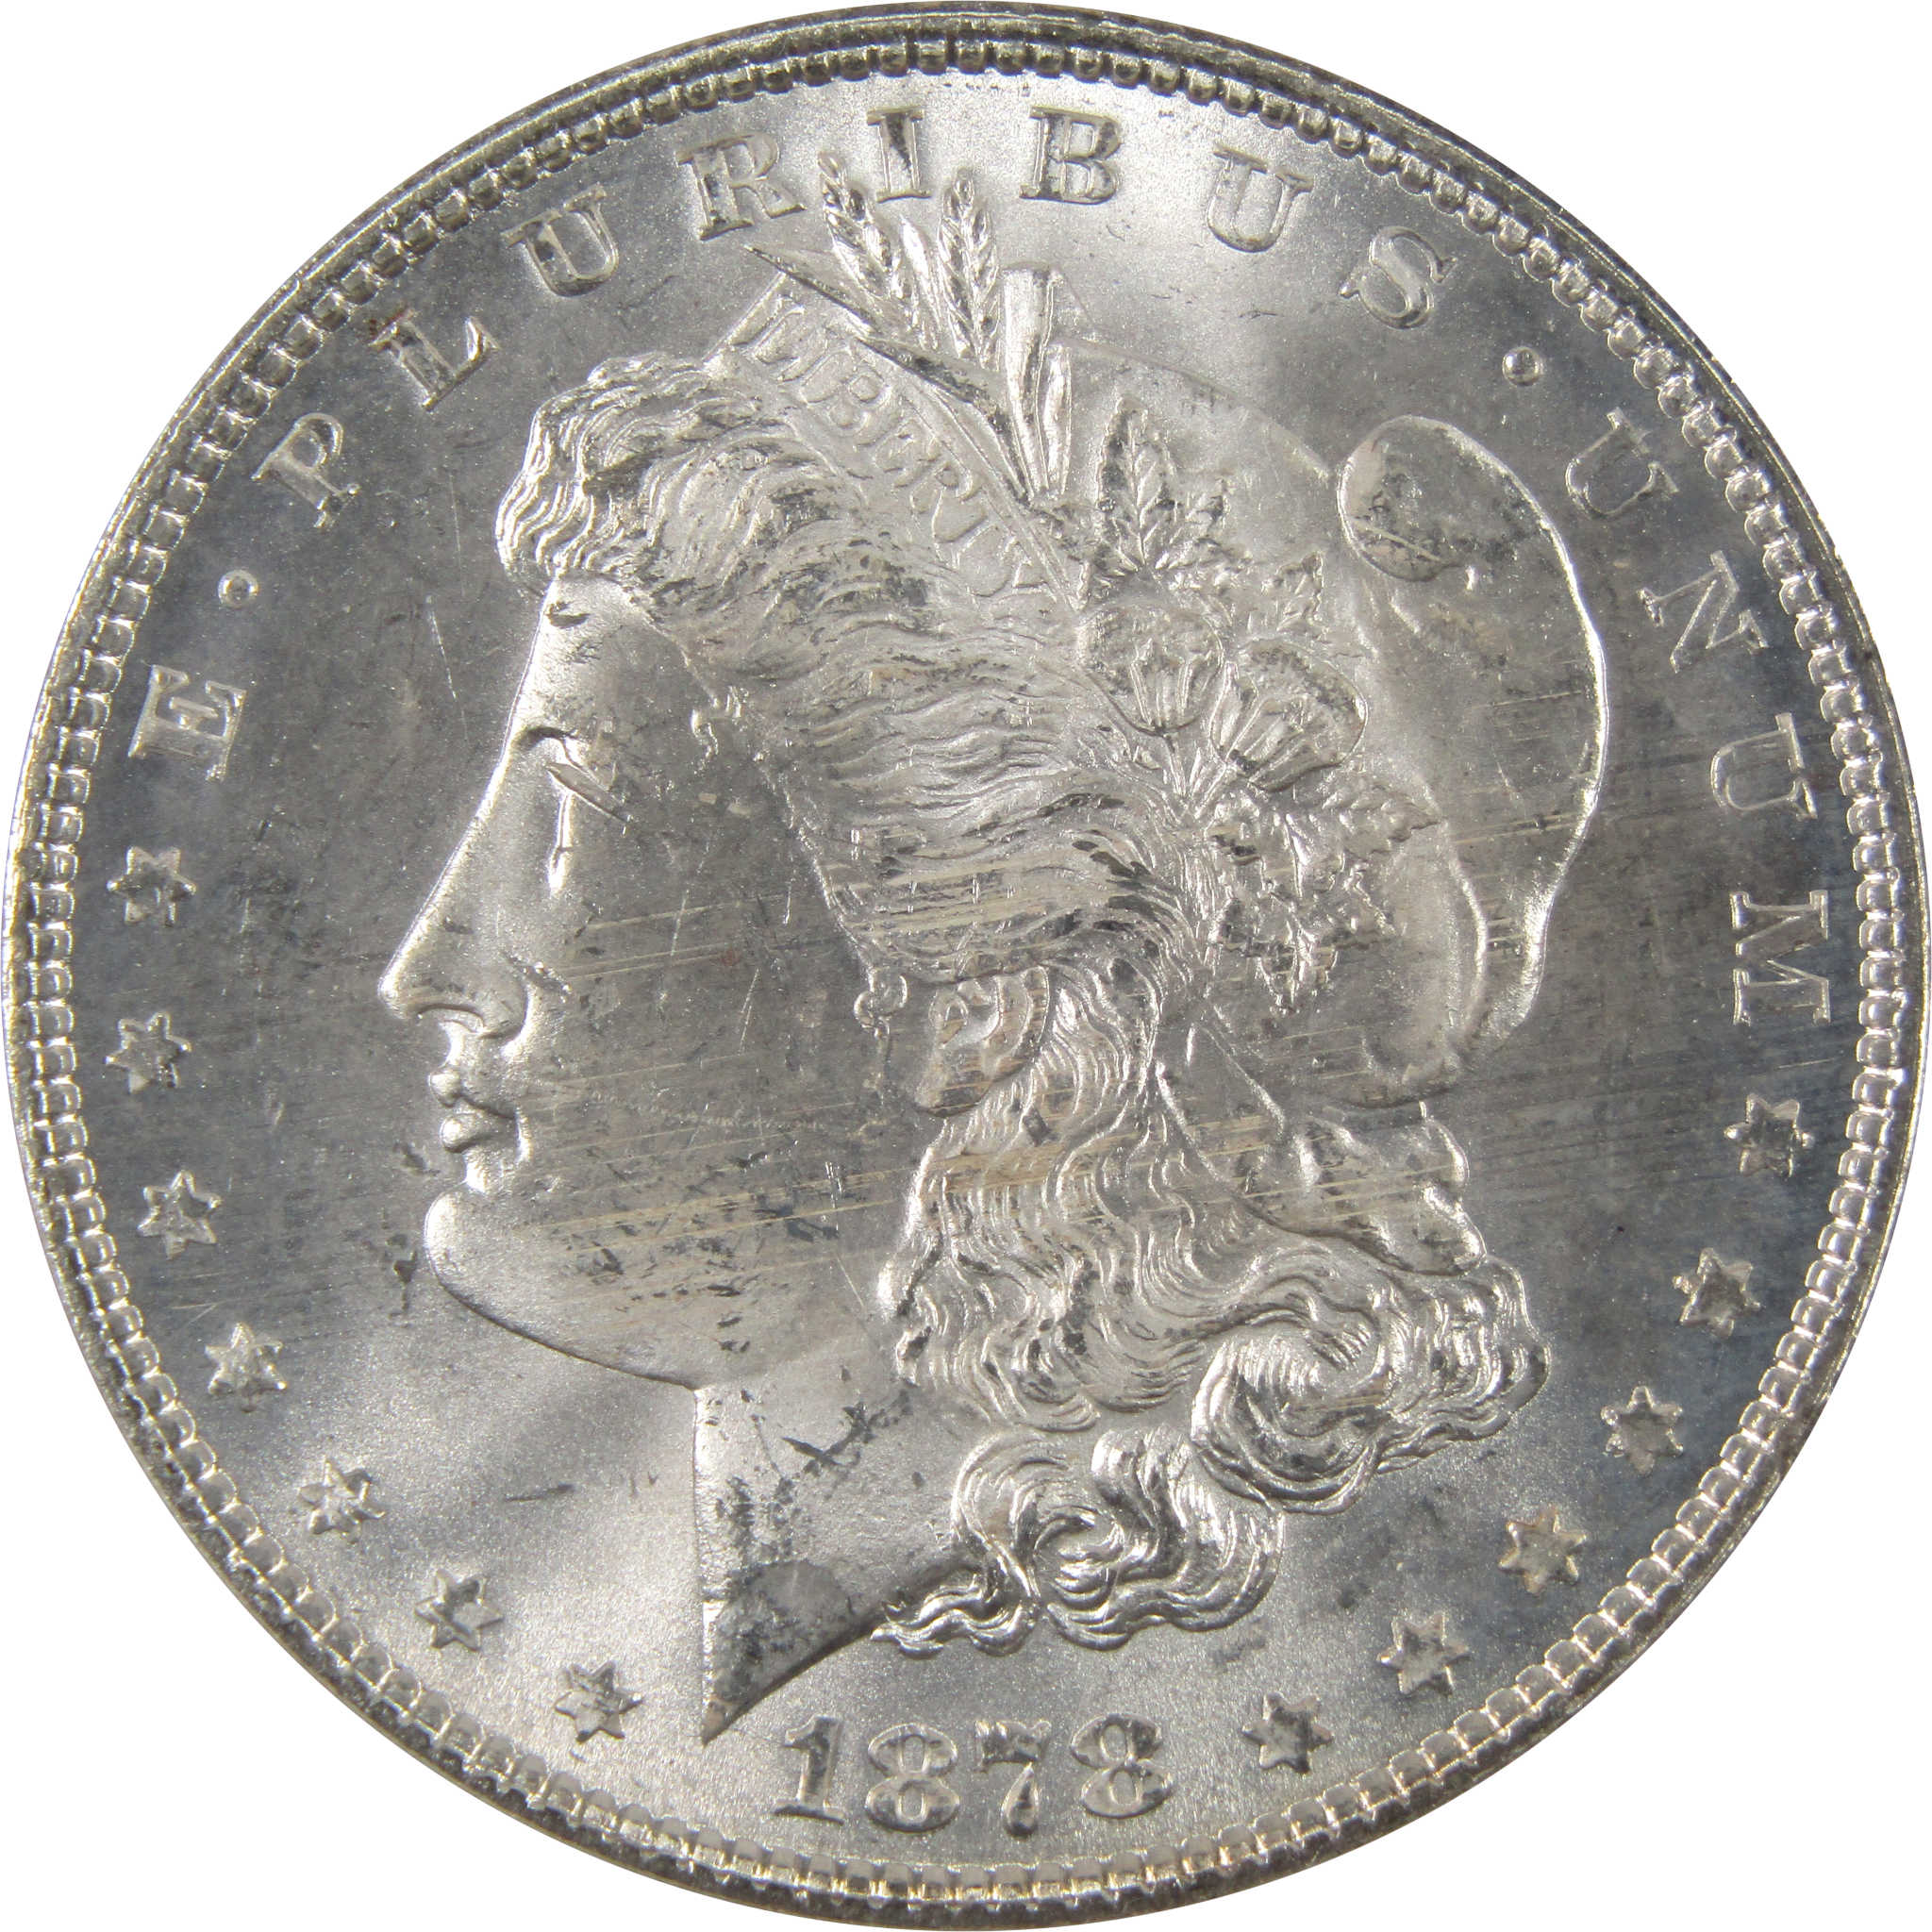 1878 7/8TF Morgan Dollar MS 64 NGC 90% Silver Uncirculated SKU:I7439 - Morgan coin - Morgan silver dollar - Morgan silver dollar for sale - Profile Coins &amp; Collectibles